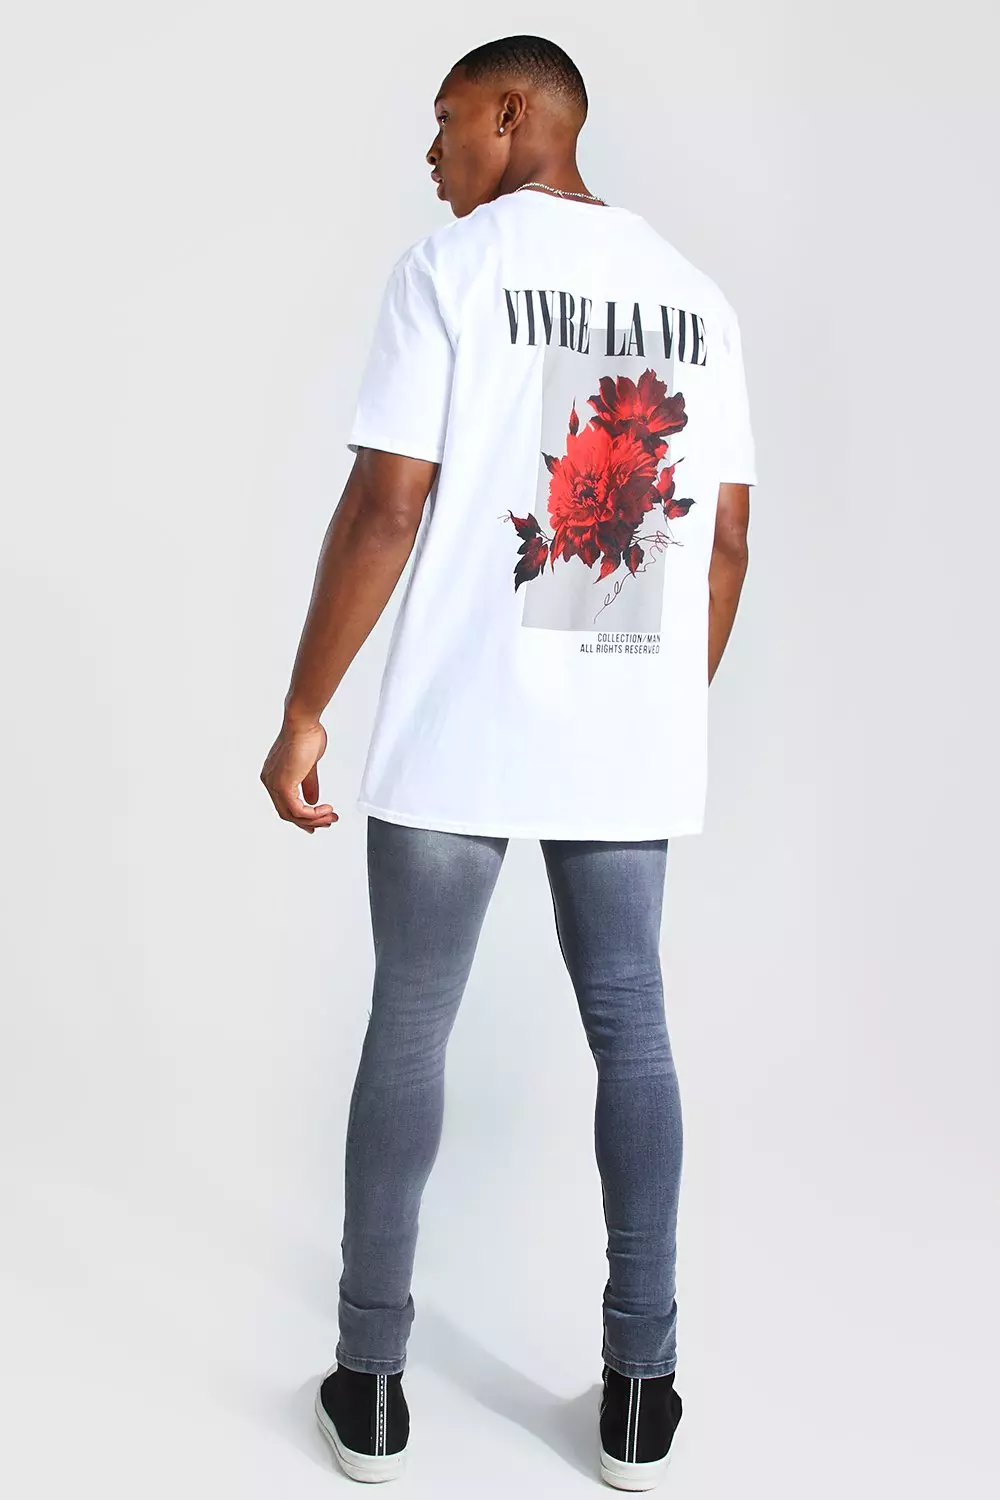 boohooMAN Plus Size Oversized Rose Back Graphic T-Shirt